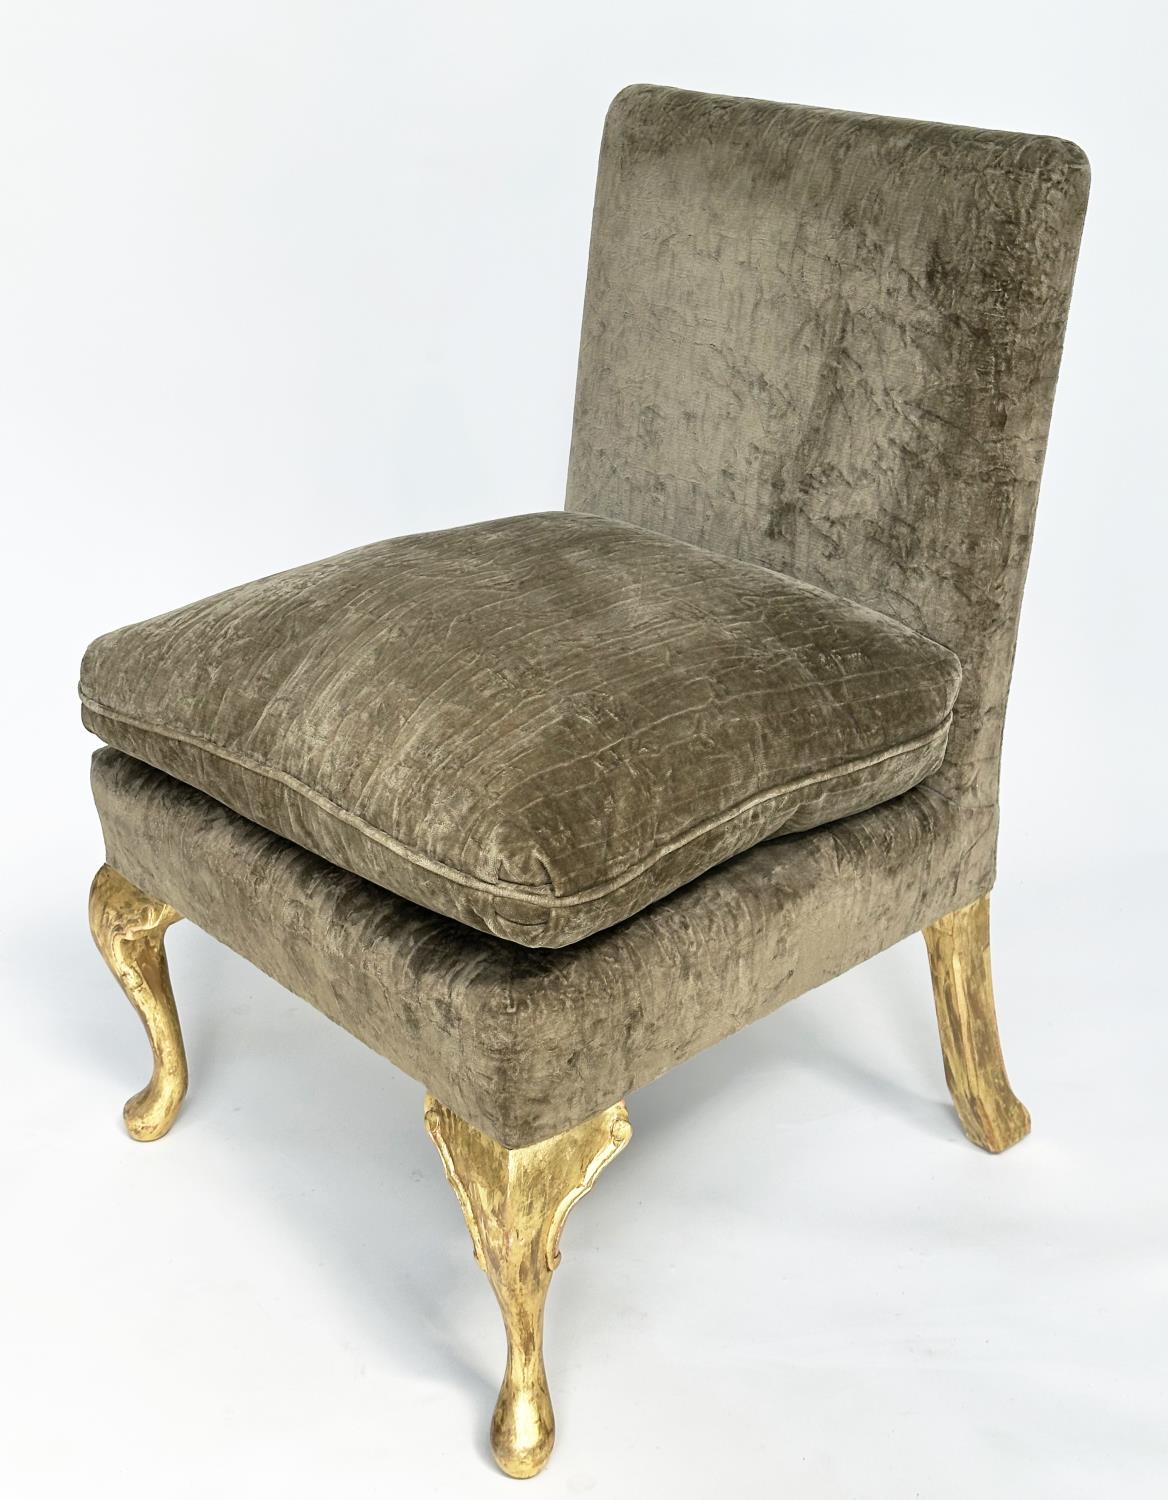 GEORGE SMITH SIDE CHAIR, teal green cut velvet upholstery and hand leaf gilded supports, 67cm W. - Image 2 of 8